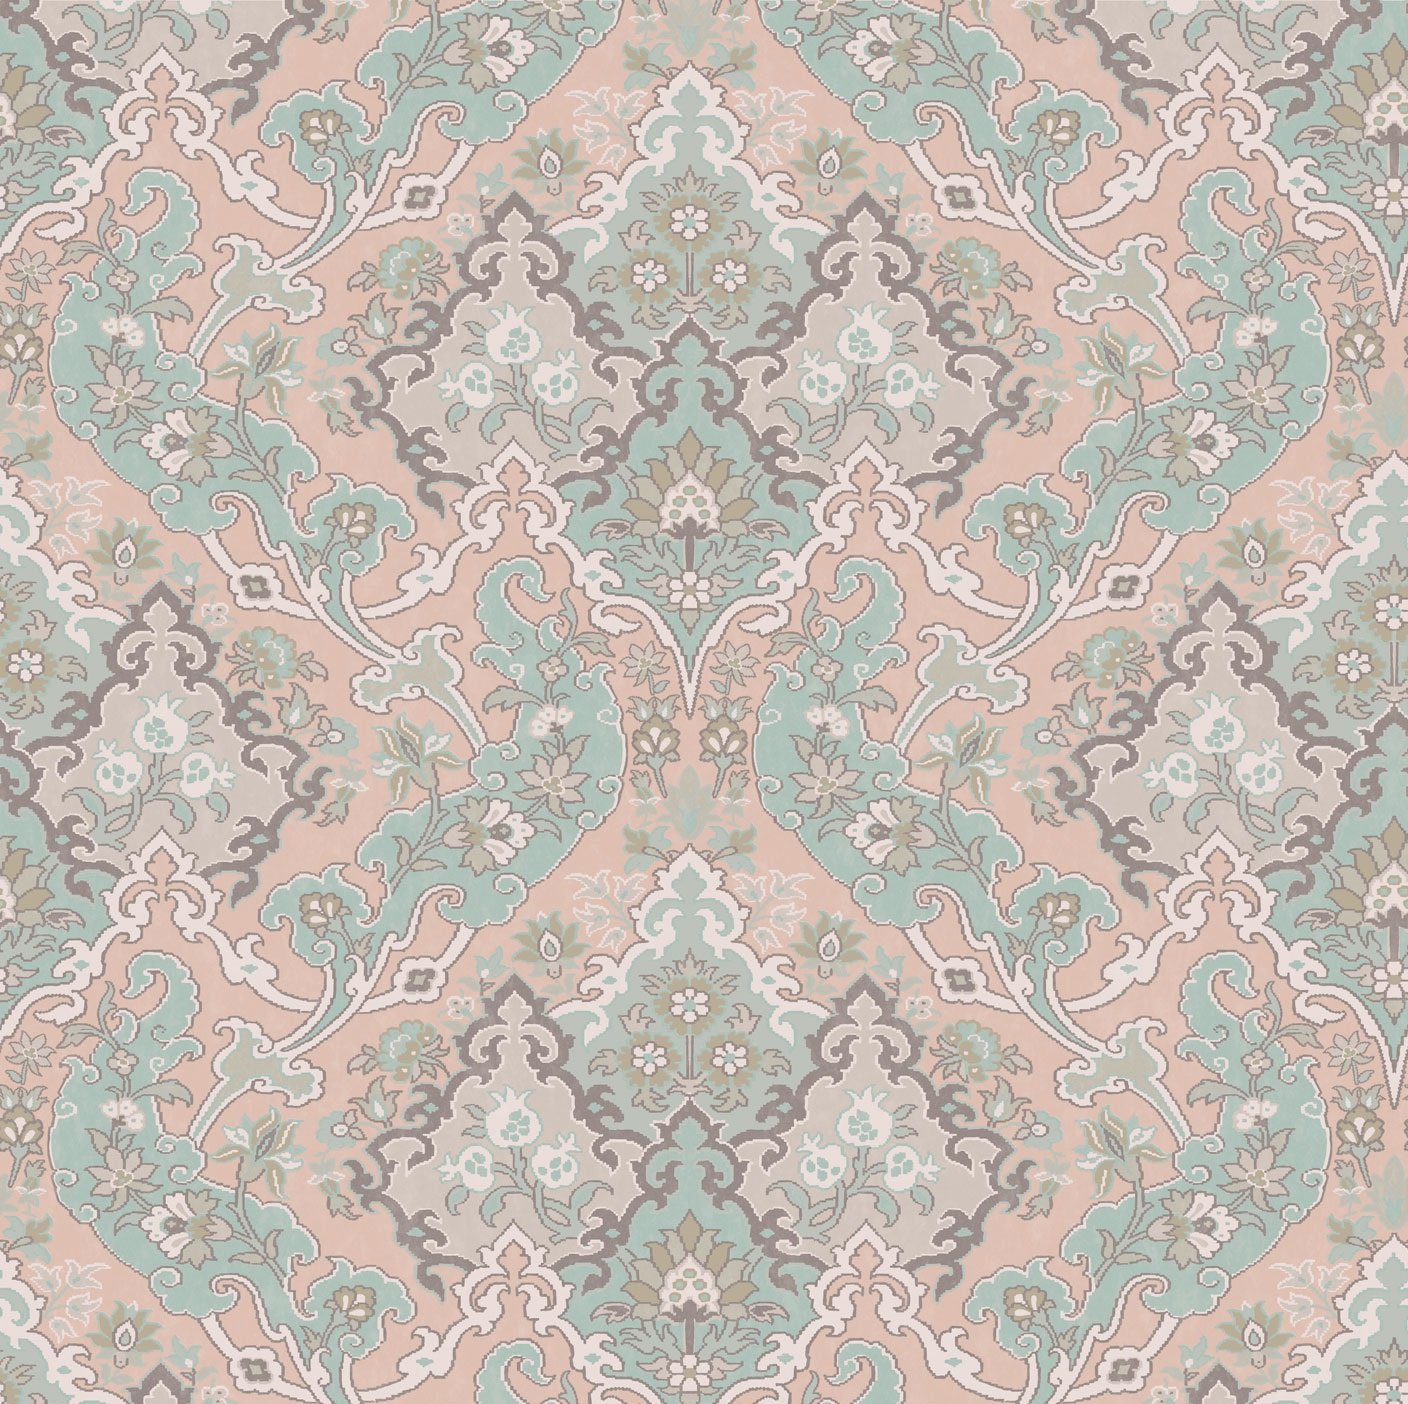 Dusty Pink/Pale Teal & Light Grey